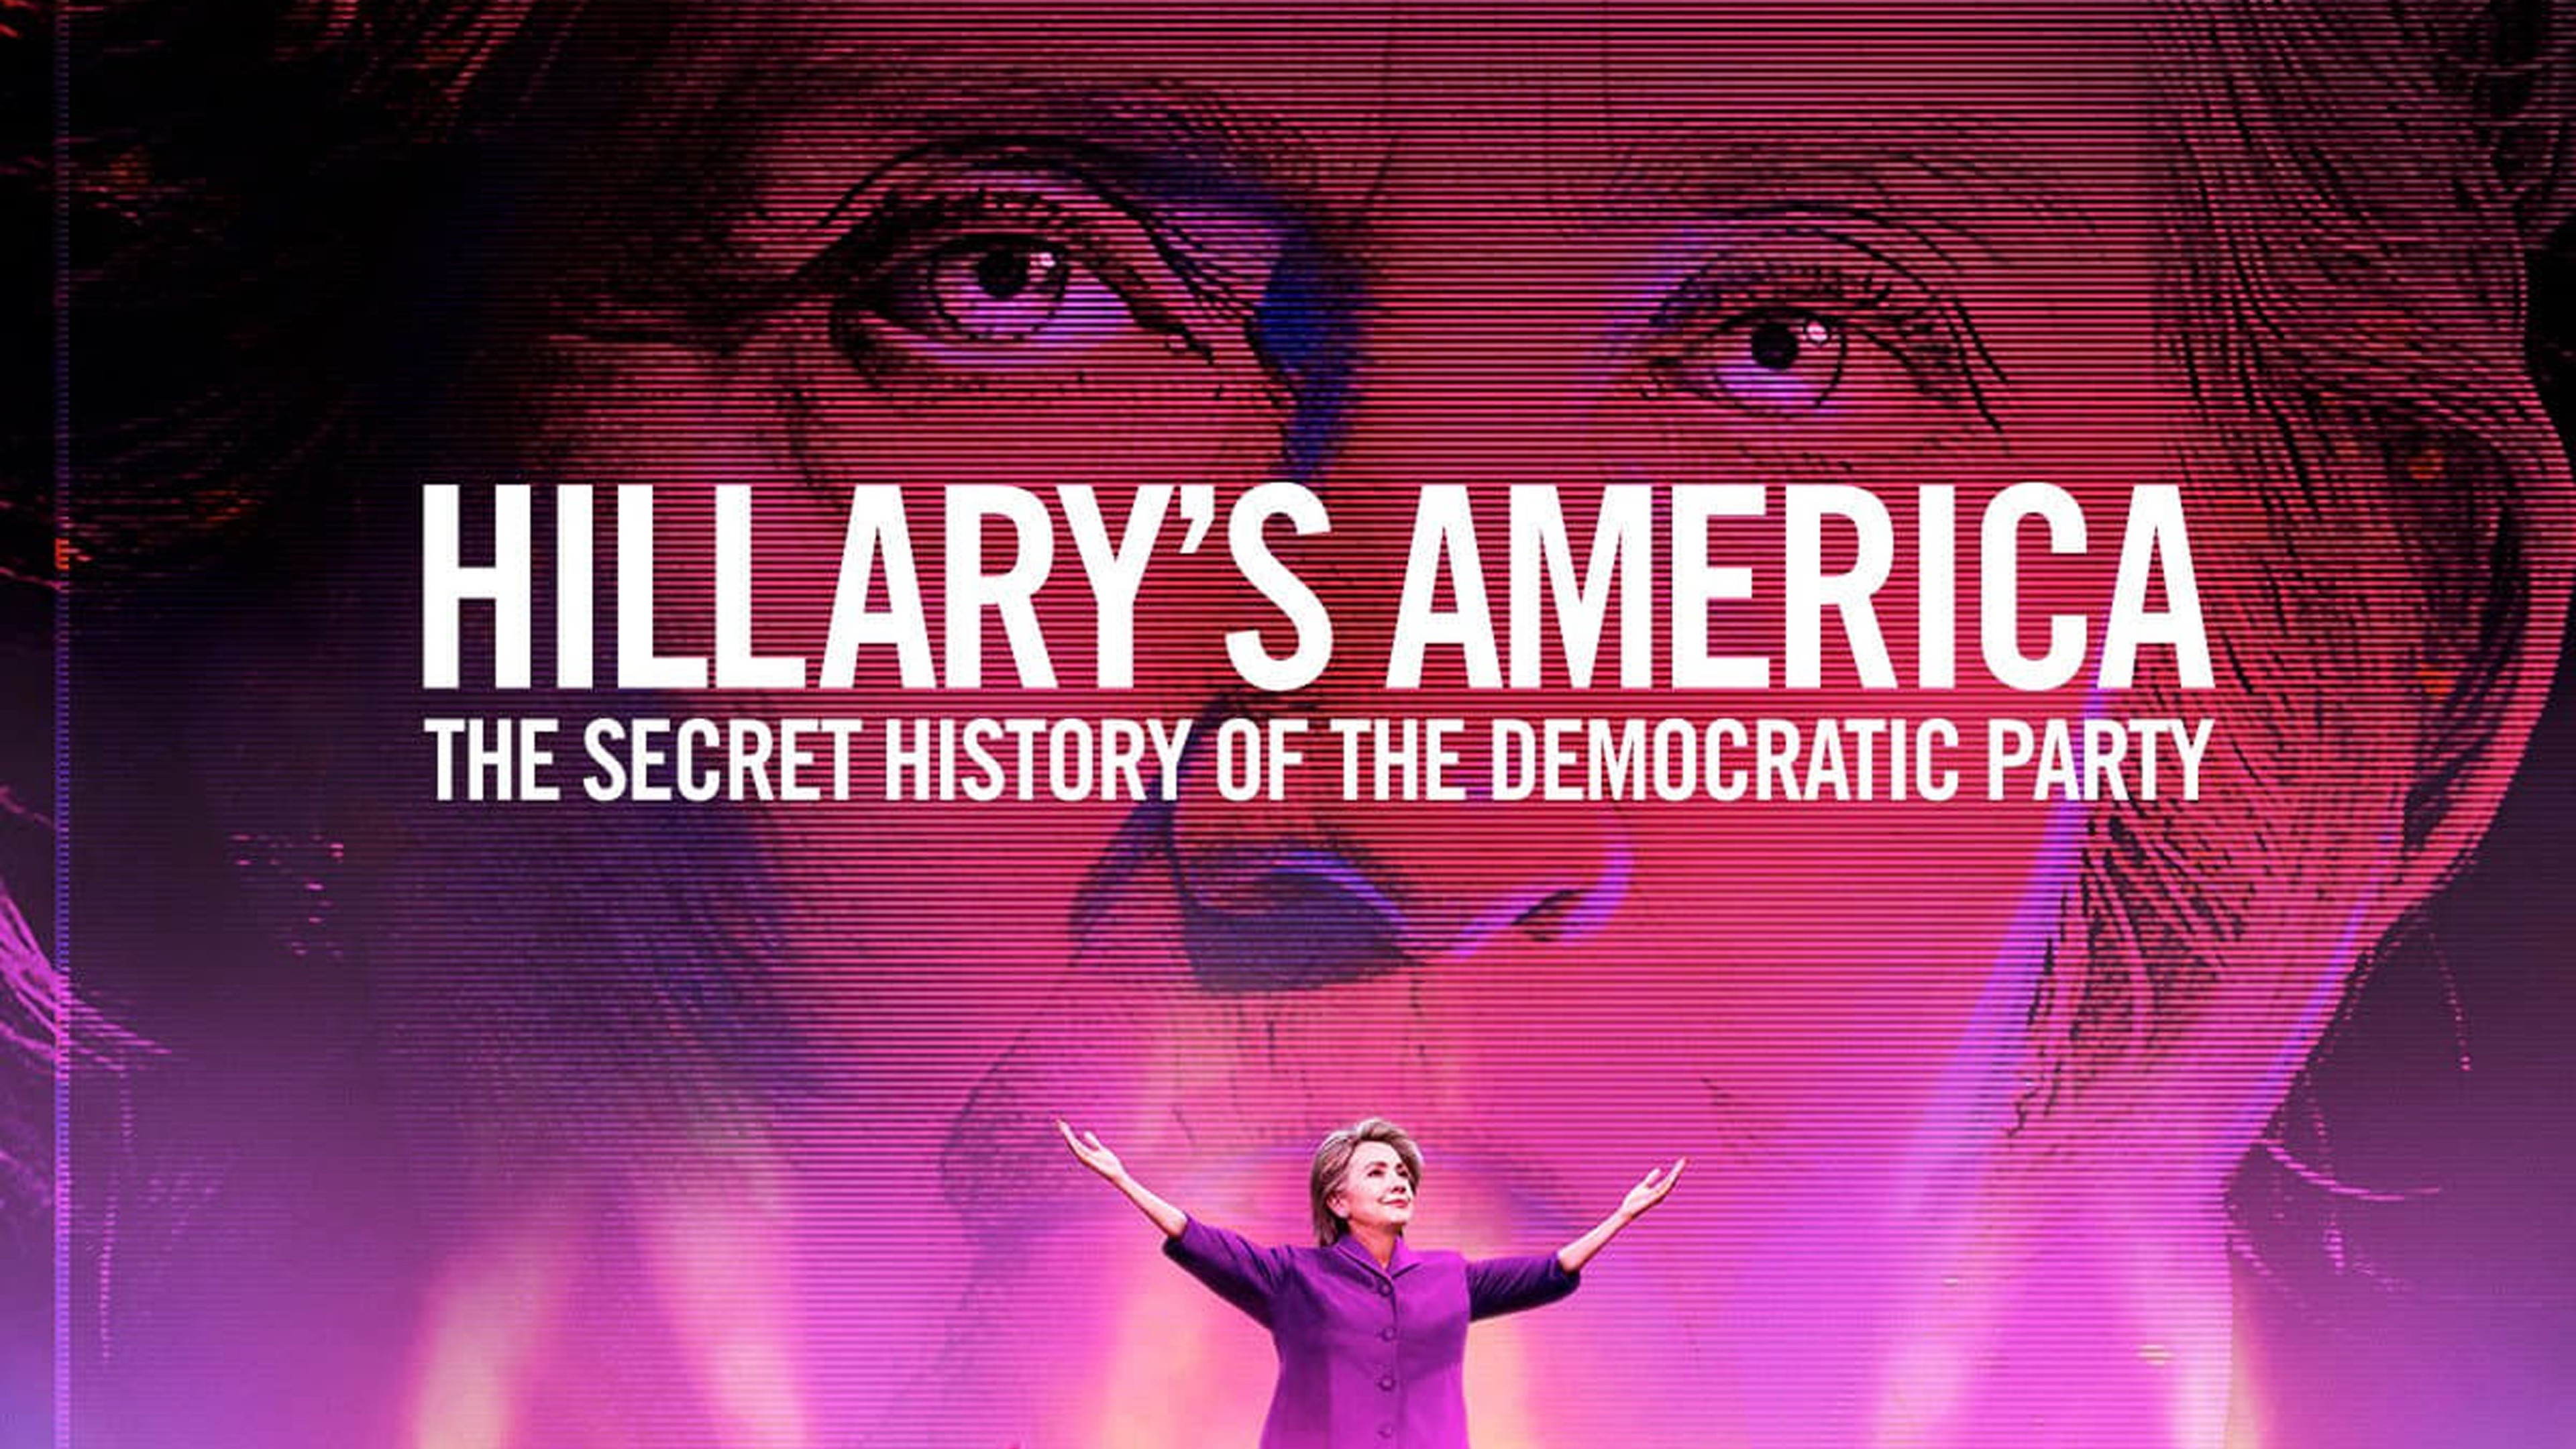 Hillary's America: The Secret History of the Democratic Party - Wikipedia